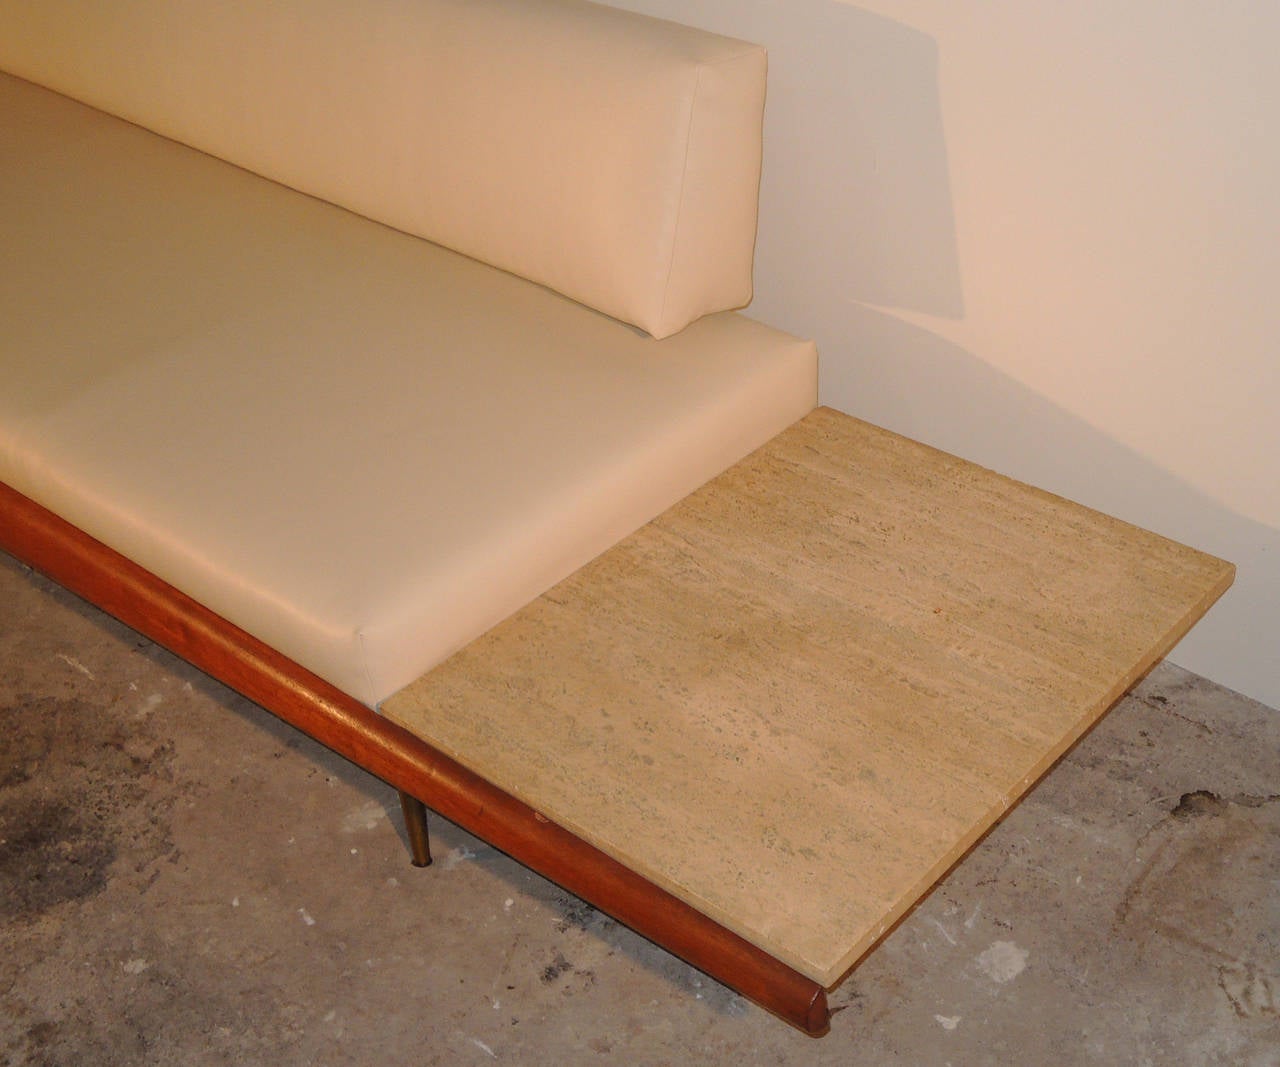 Rare Pearsall Sofa with Travertine Side Tables Built In In Good Condition For Sale In Washington, DC